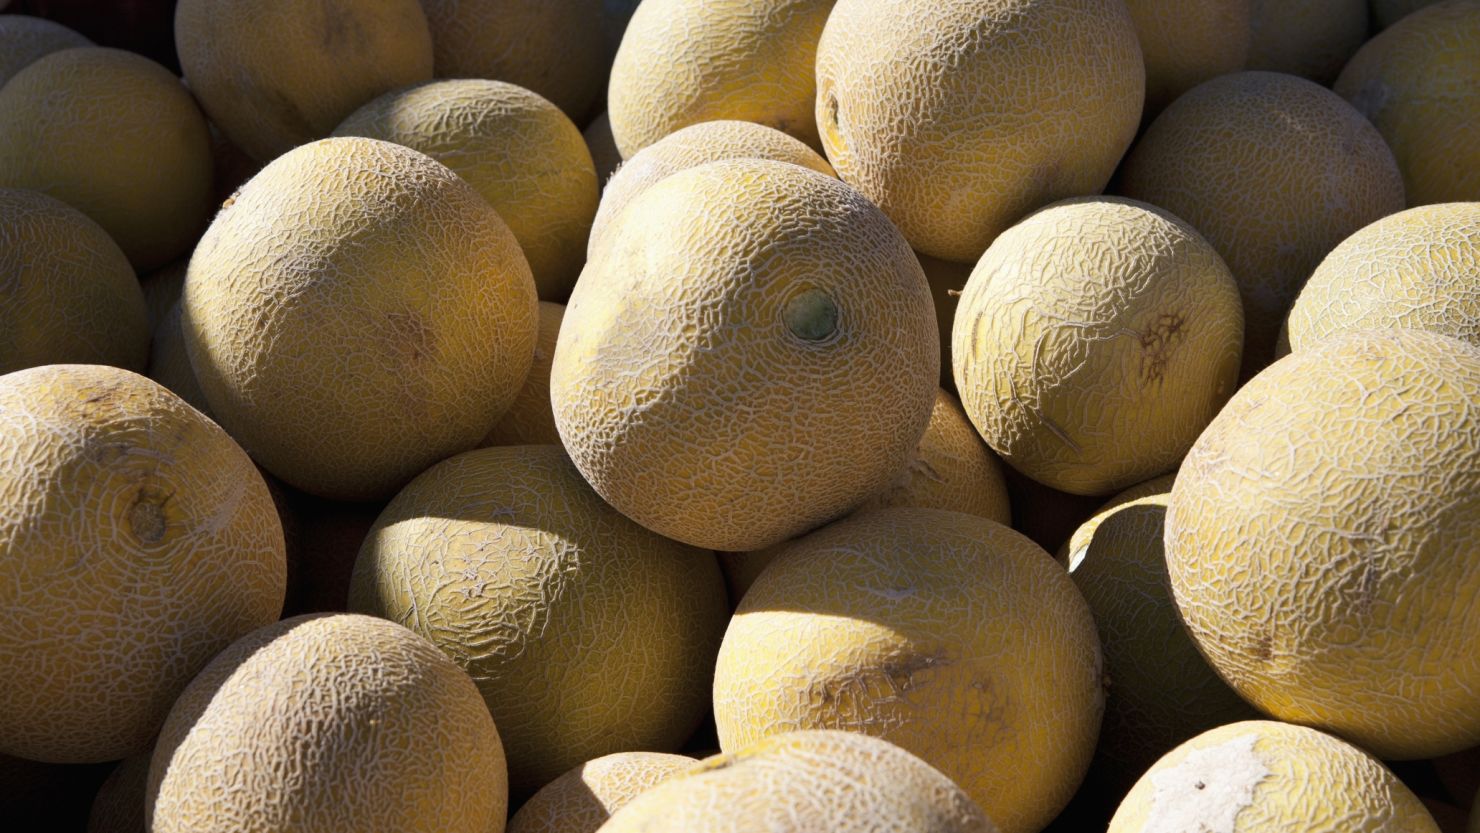 If consumers are uncertain about the source of a cantaloupe, they are urged to ask their supermarket. 